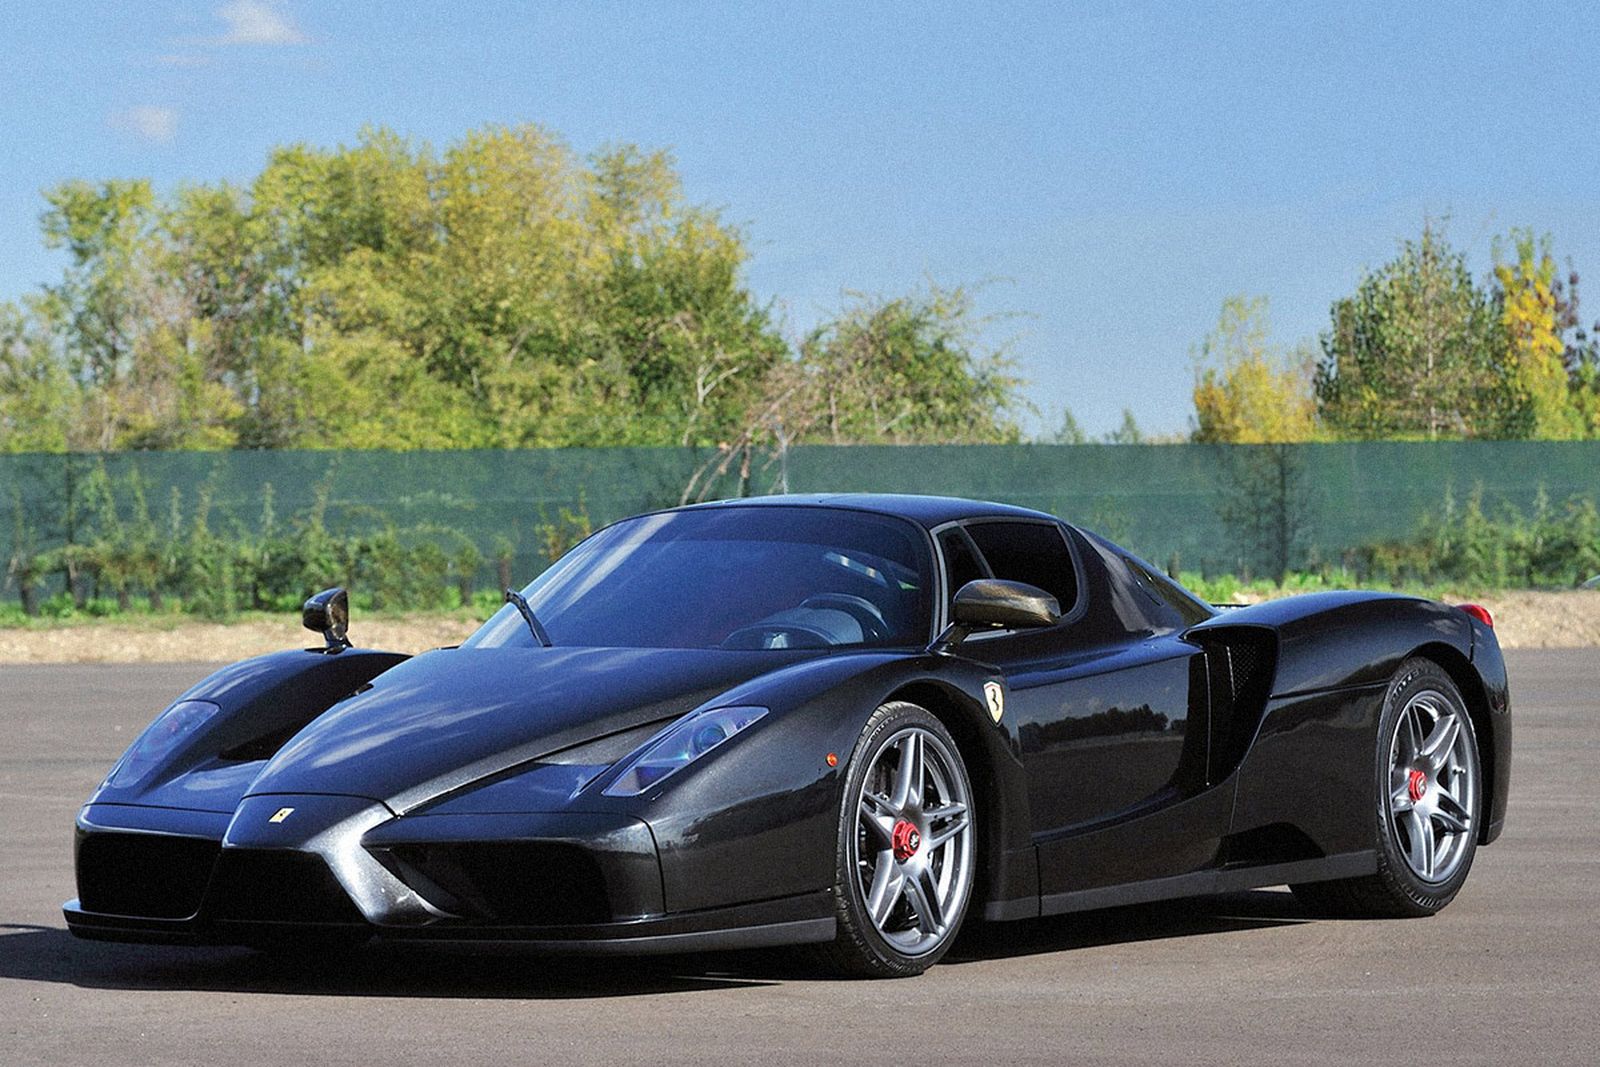 This Rare Black Enzo Ferrari Is Now up for Sale for $2.4 Million